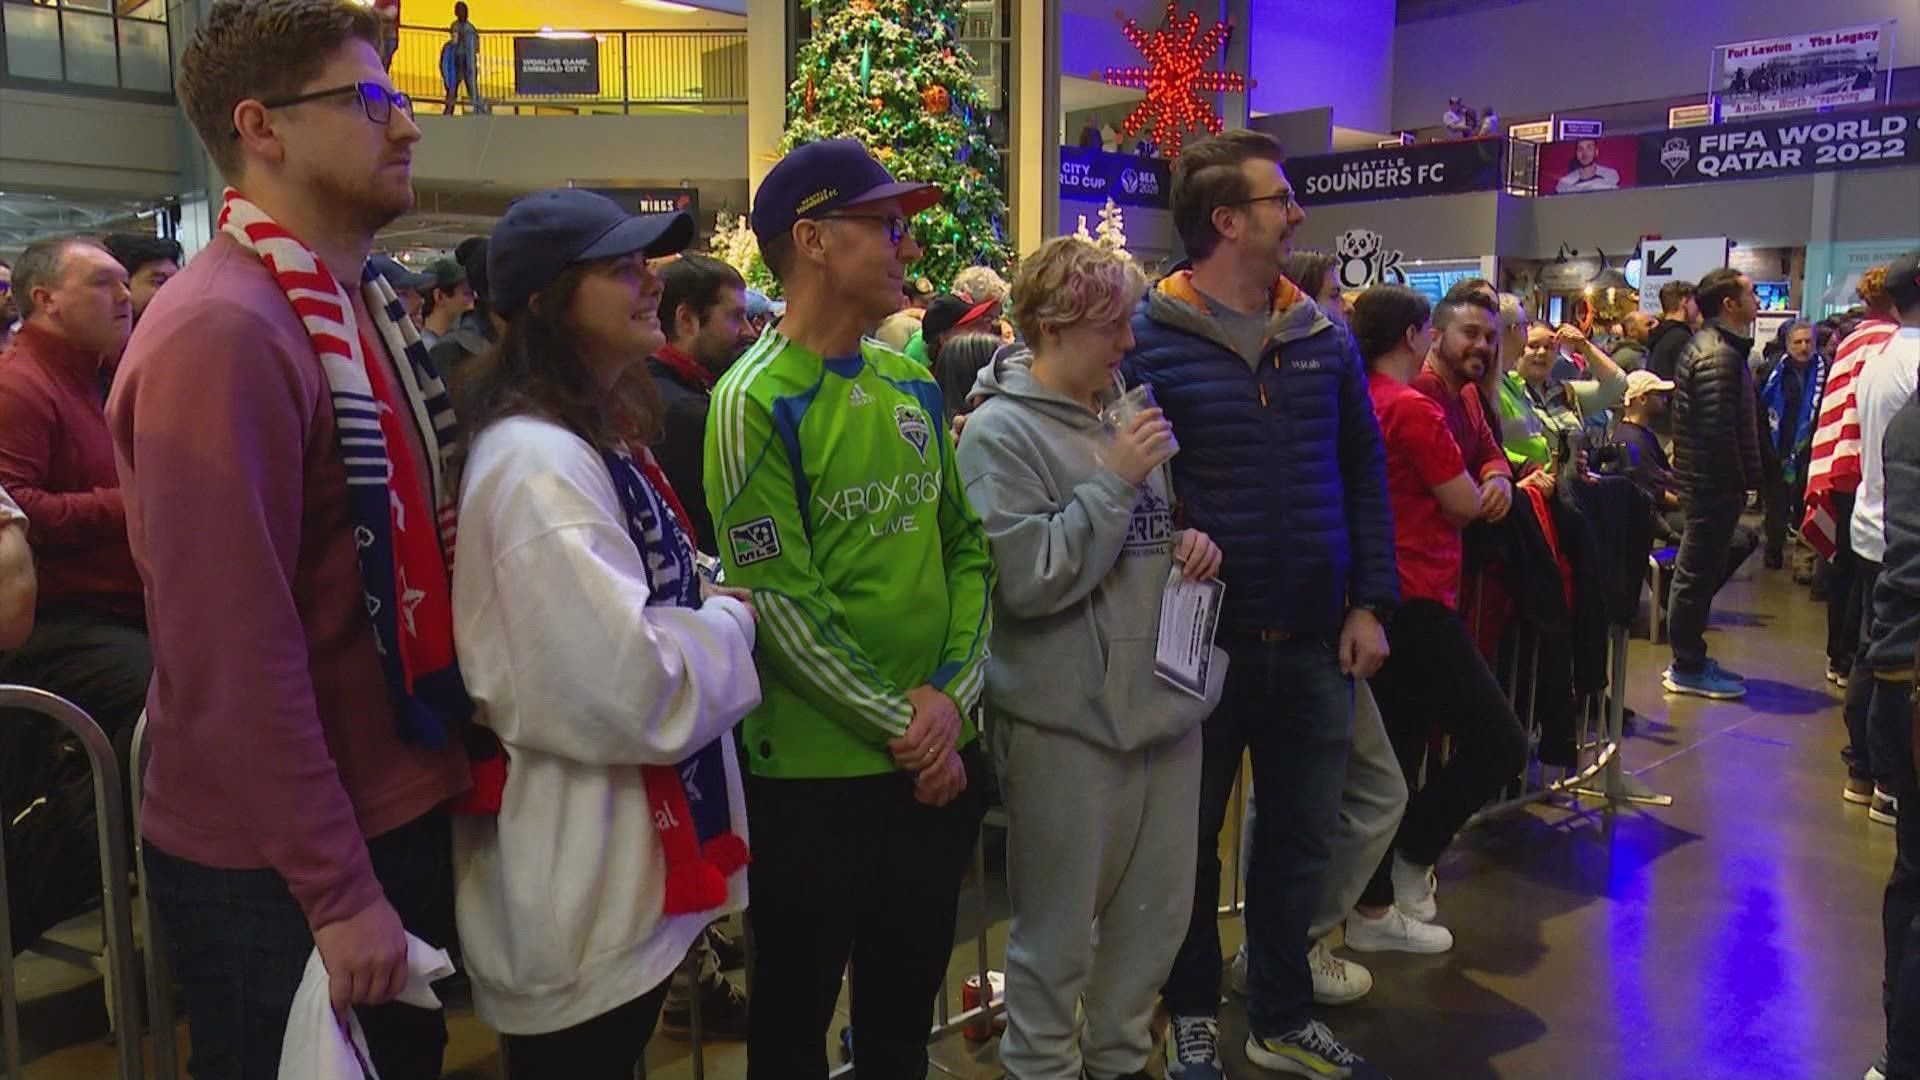 Watch parties were held when the US men's national soccer team played England on Nov. 25.